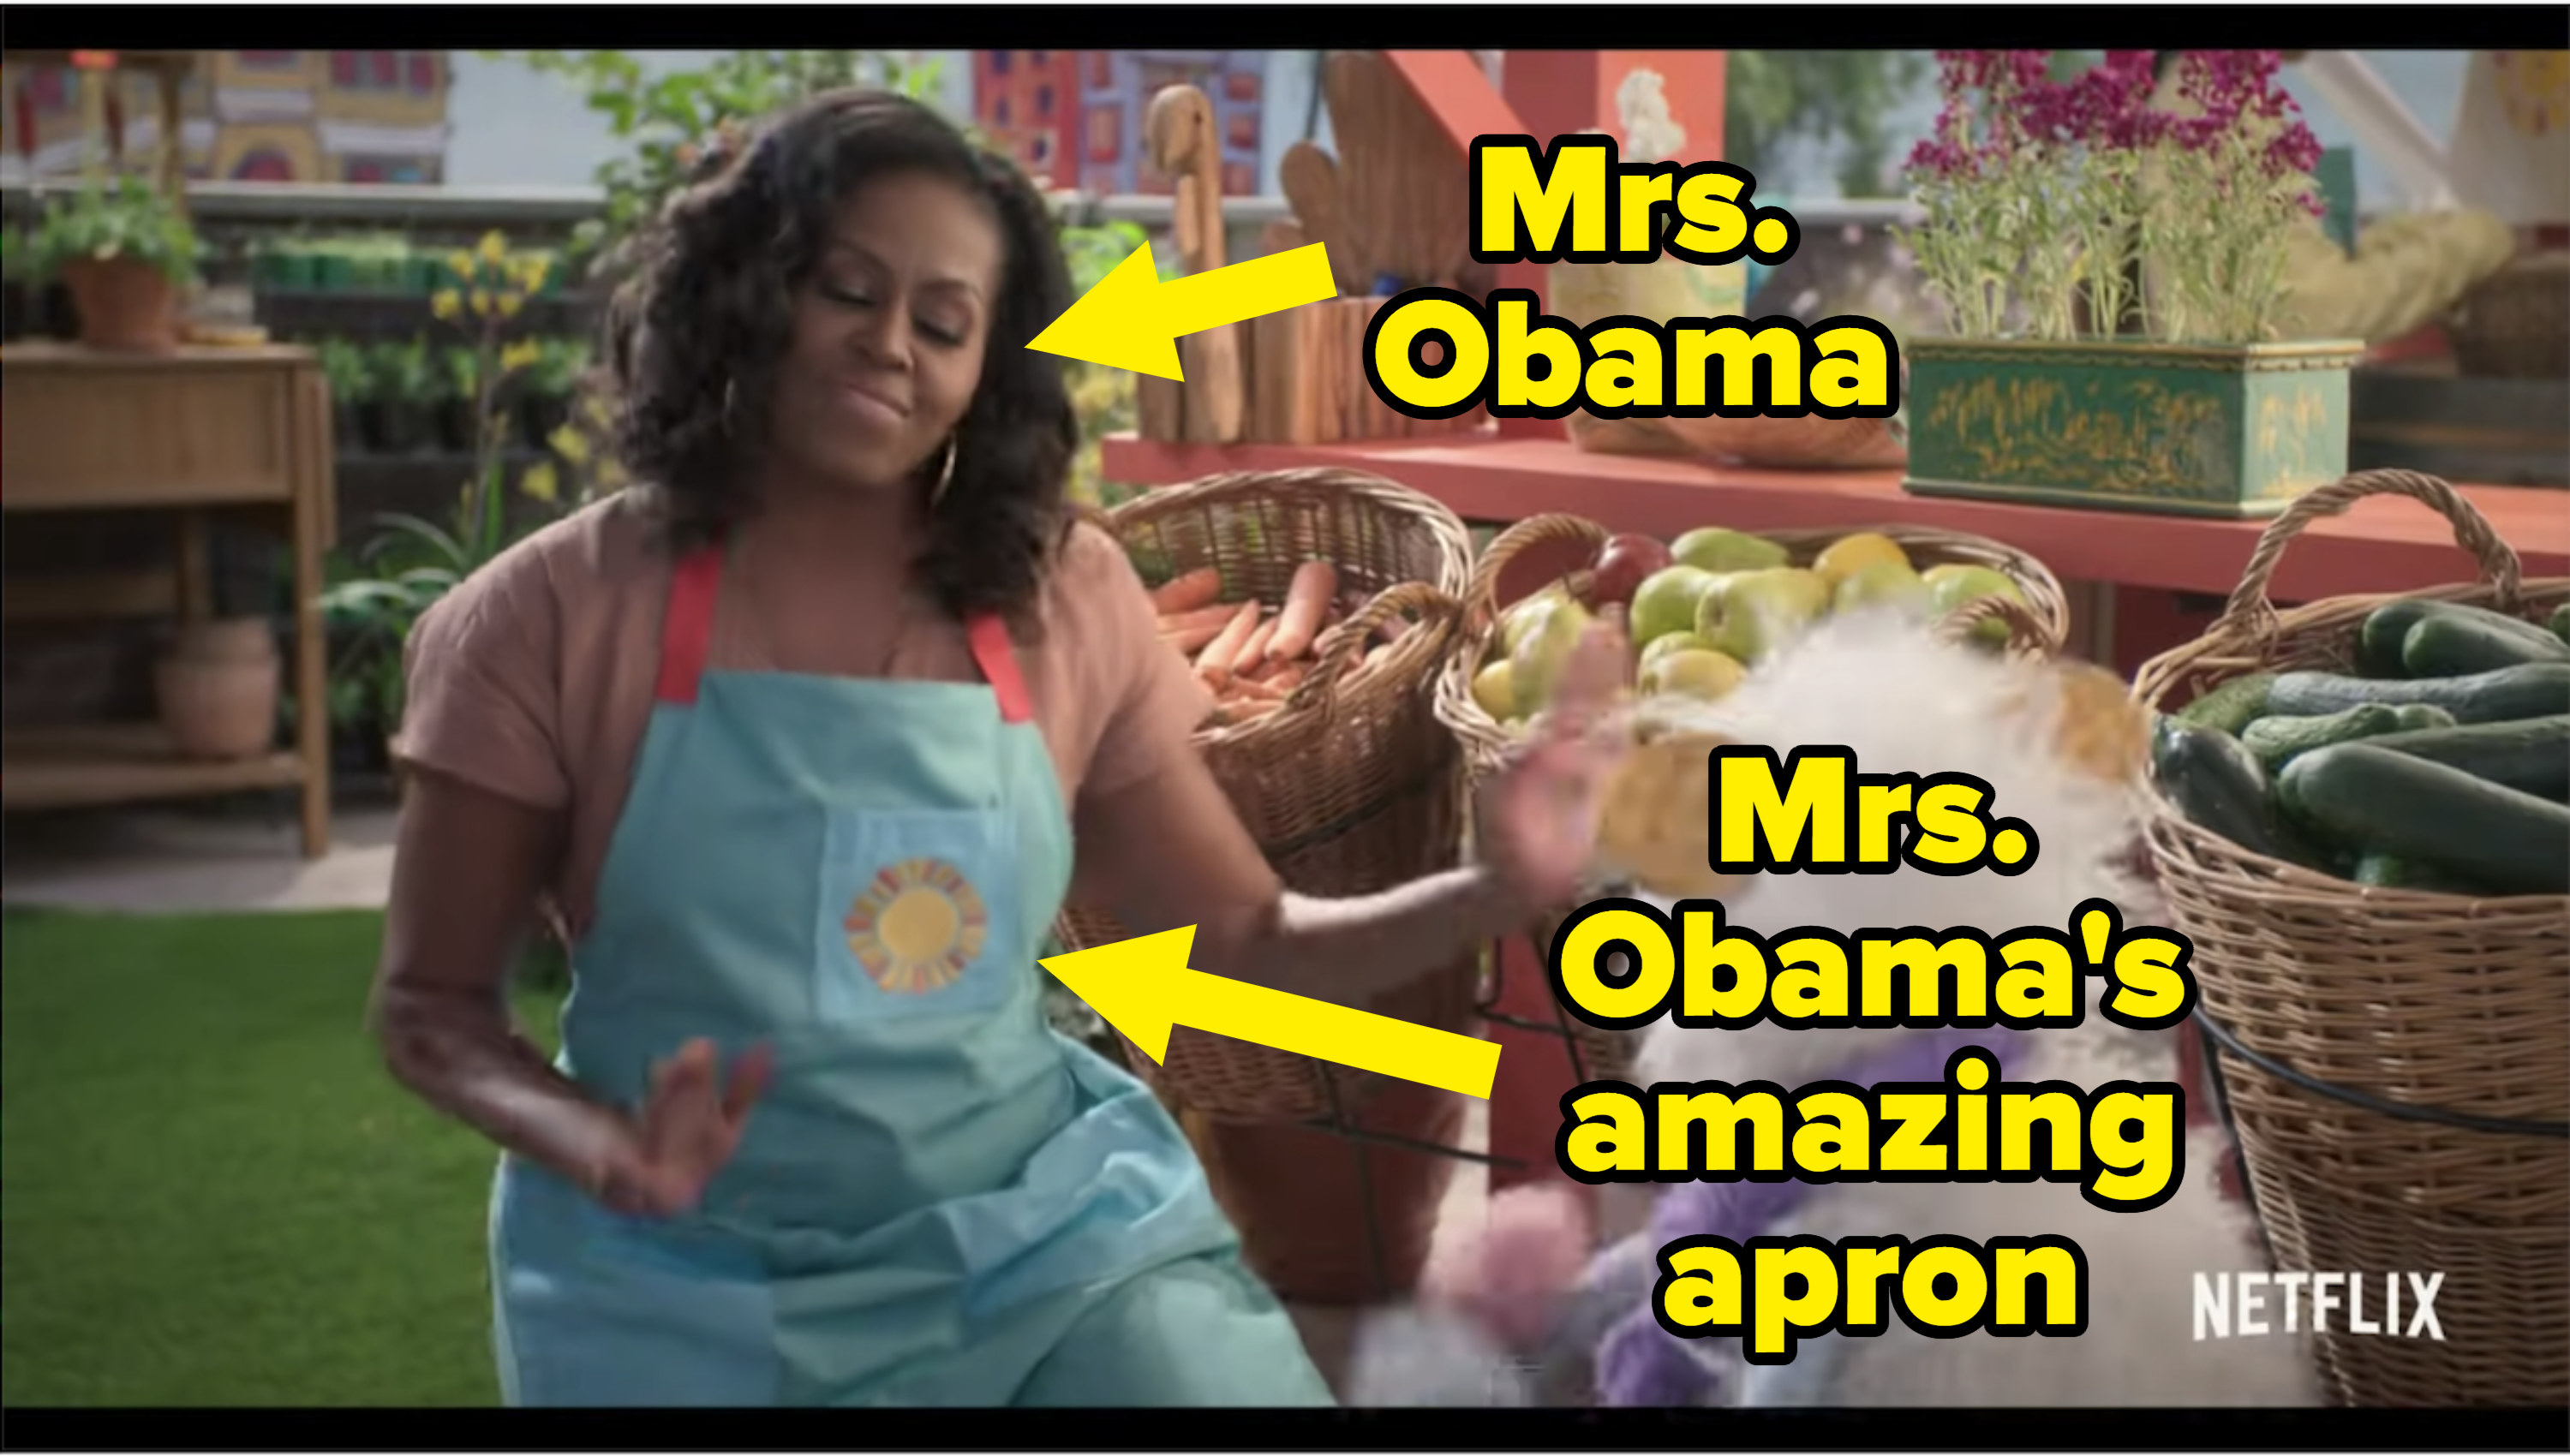 Michelle Obama on the grocery store rooftop